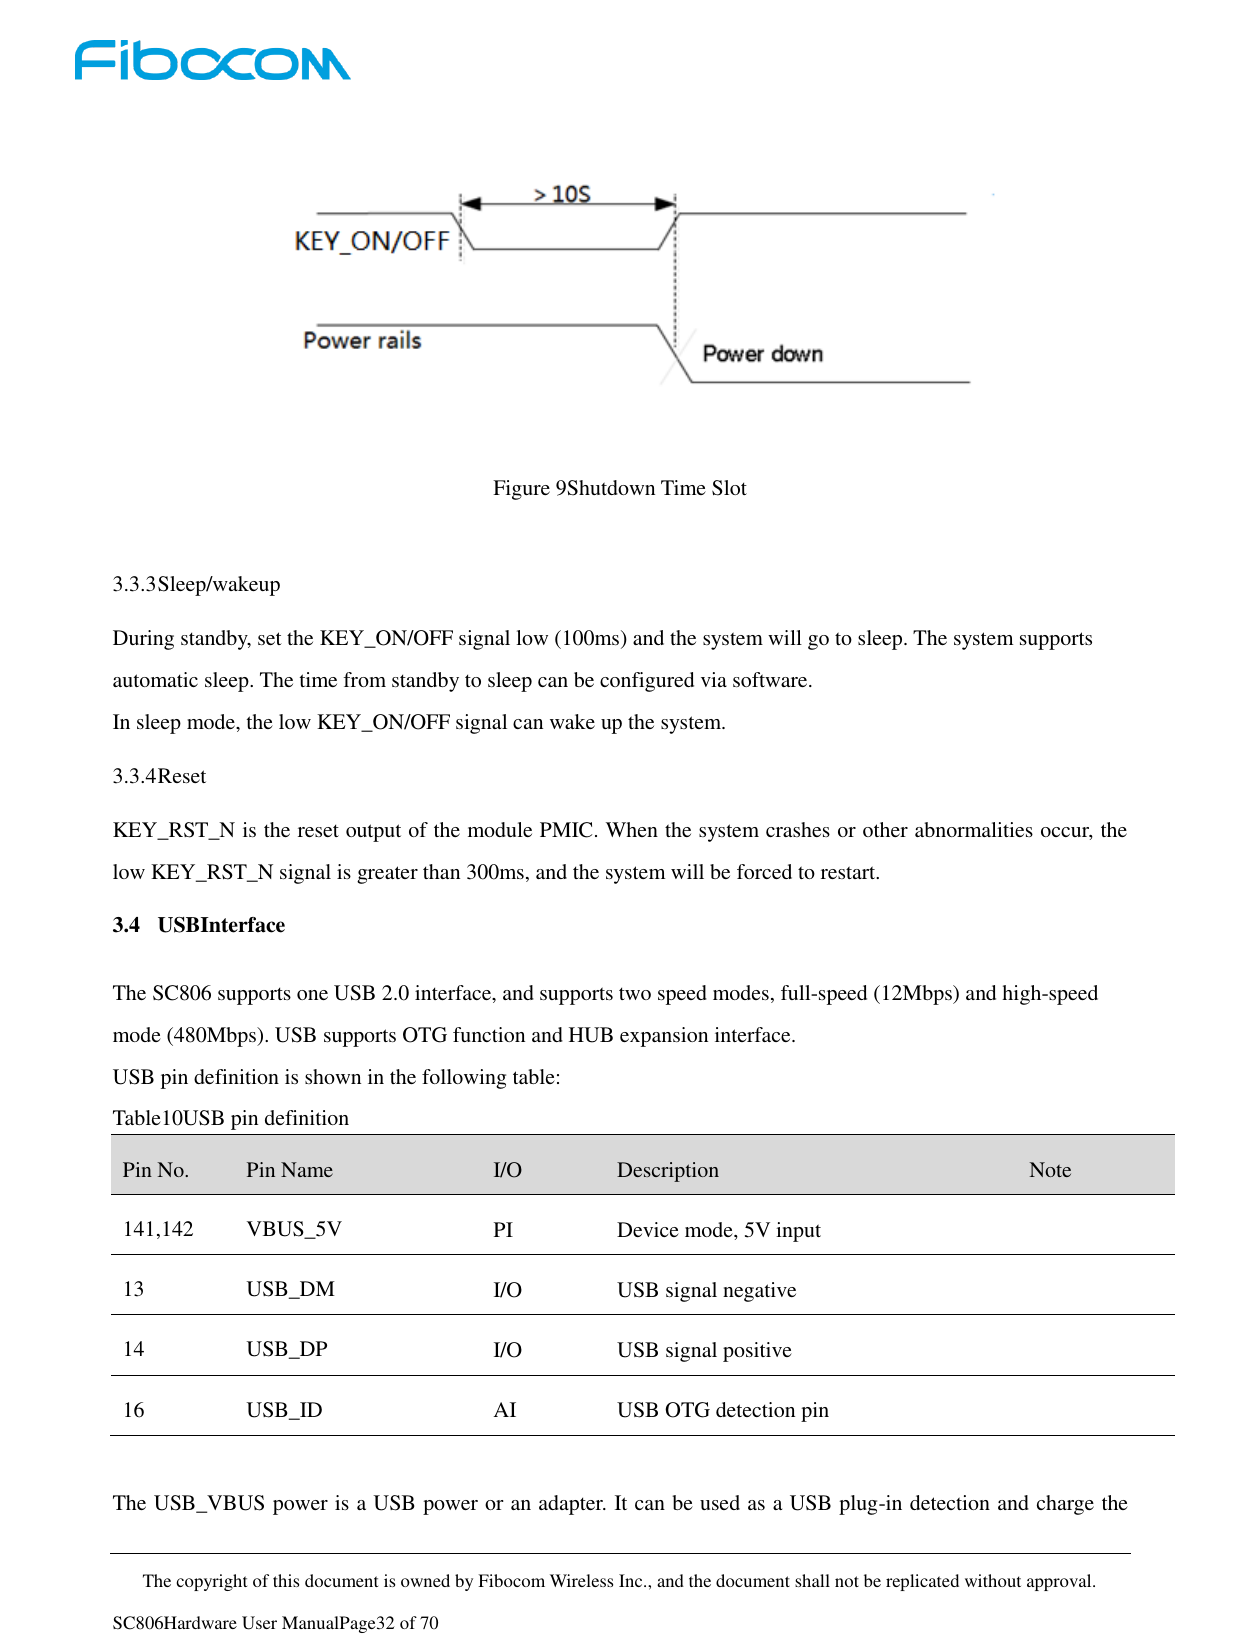     The copyright of this document is owned by Fibocom Wireless Inc., and the document shall not be replicated without approval.   SC806Hardware User ManualPage32 of 70  Figure 9Shutdown Time Slot  3.3.3 Sleep/wakeup During standby, set the KEY_ON/OFF signal low (100ms) and the system will go to sleep. The system supports automatic sleep. The time from standby to sleep can be configured via software. In sleep mode, the low KEY_ON/OFF signal can wake up the system. 3.3.4 Reset KEY_RST_N is the reset output of the module PMIC. When the system crashes or other abnormalities occur, the low KEY_RST_N signal is greater than 300ms, and the system will be forced to restart. 3.4 USBInterface The SC806 supports one USB 2.0 interface, and supports two speed modes, full-speed (12Mbps) and high-speed mode (480Mbps). USB supports OTG function and HUB expansion interface. USB pin definition is shown in the following table: Table10USB pin definition Pin No. Pin Name I/O Description Note 141,142 VBUS_5V PI Device mode, 5V input  13 USB_DM I/O USB signal negative  14 USB_DP I/O USB signal positive  16 USB_ID AI USB OTG detection pin   The USB_VBUS power is a USB power or an adapter. It can be used as a USB plug-in detection and charge the 